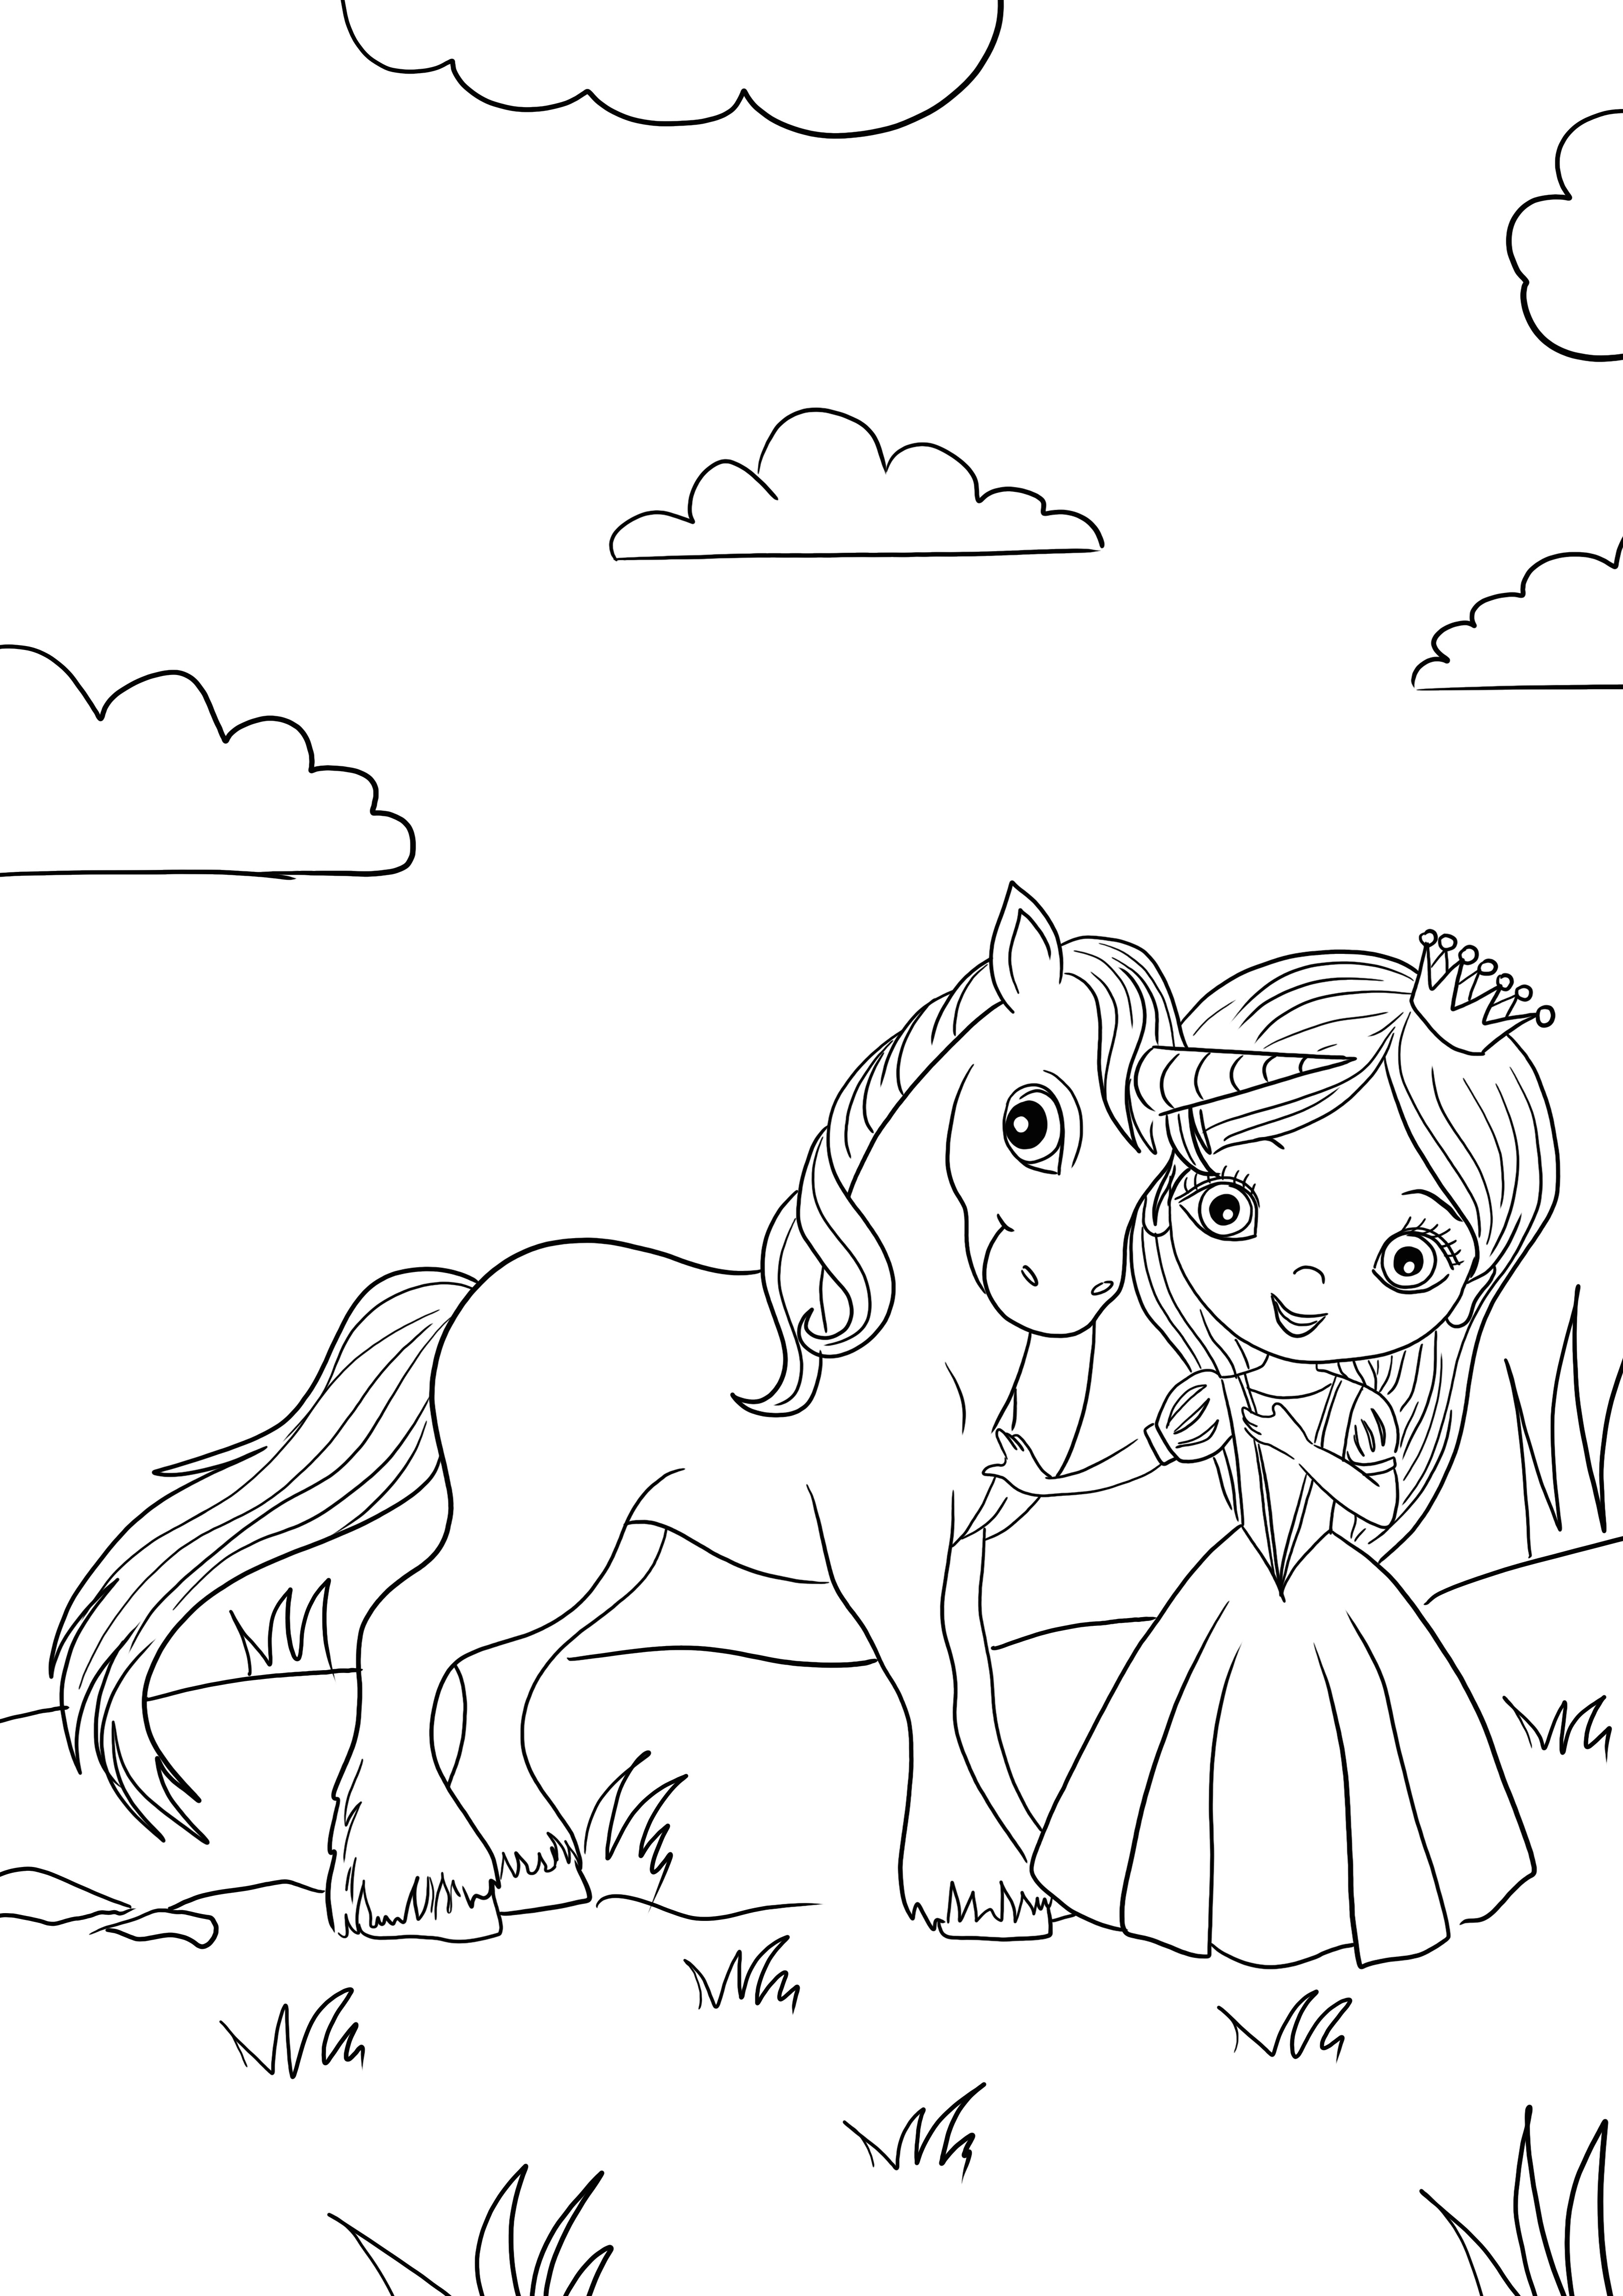 Princess and unicorn-free to download and color page